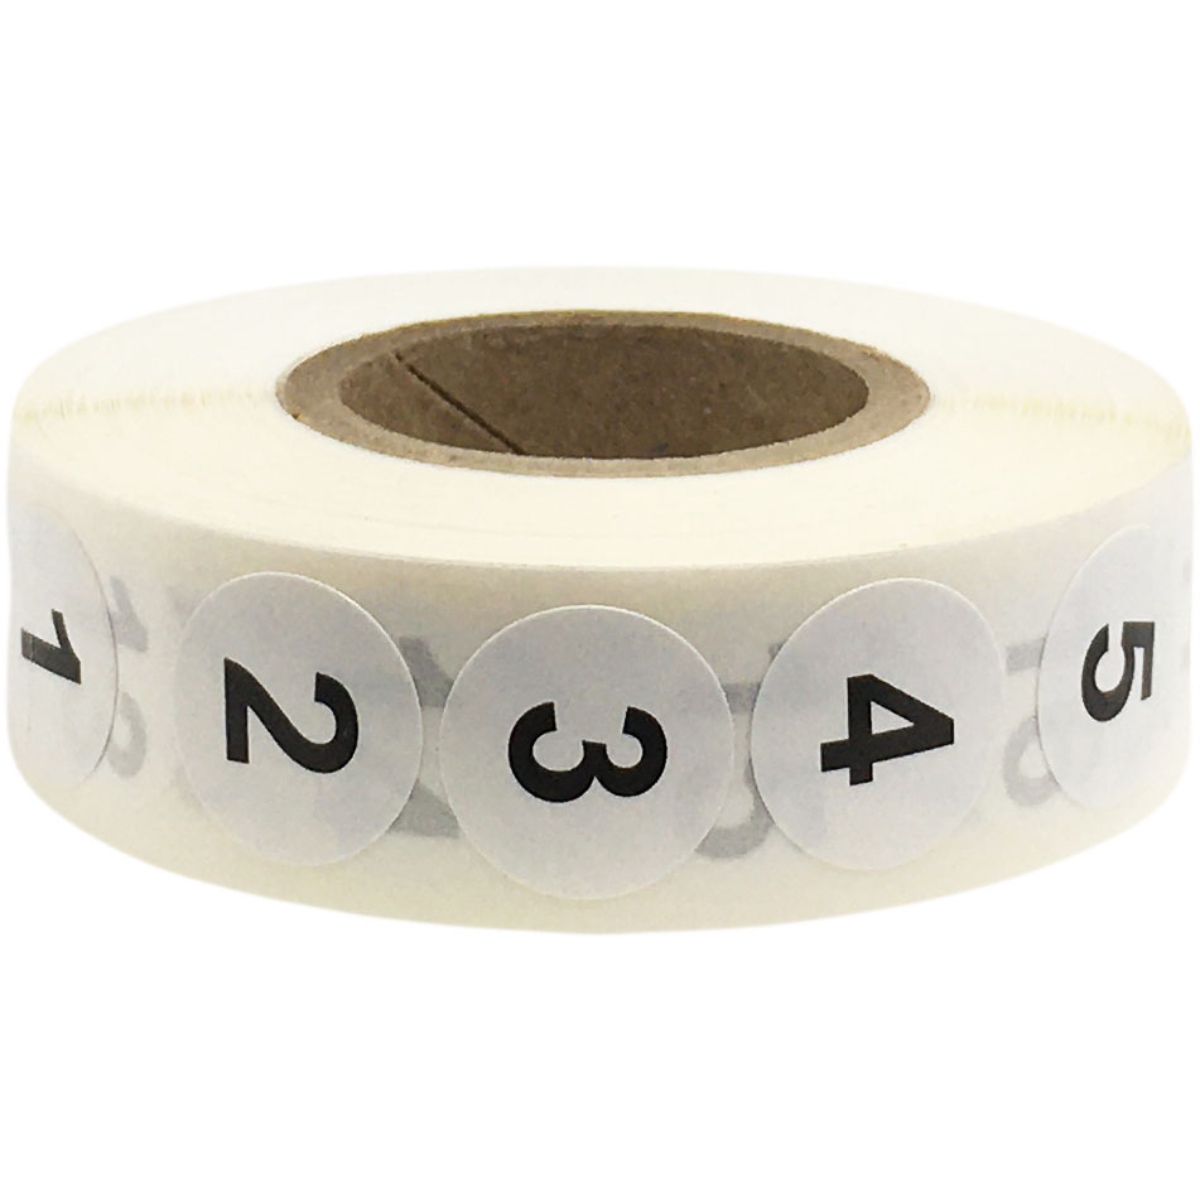 Consecutive Number Labels 1 - 100, 1/2 Round